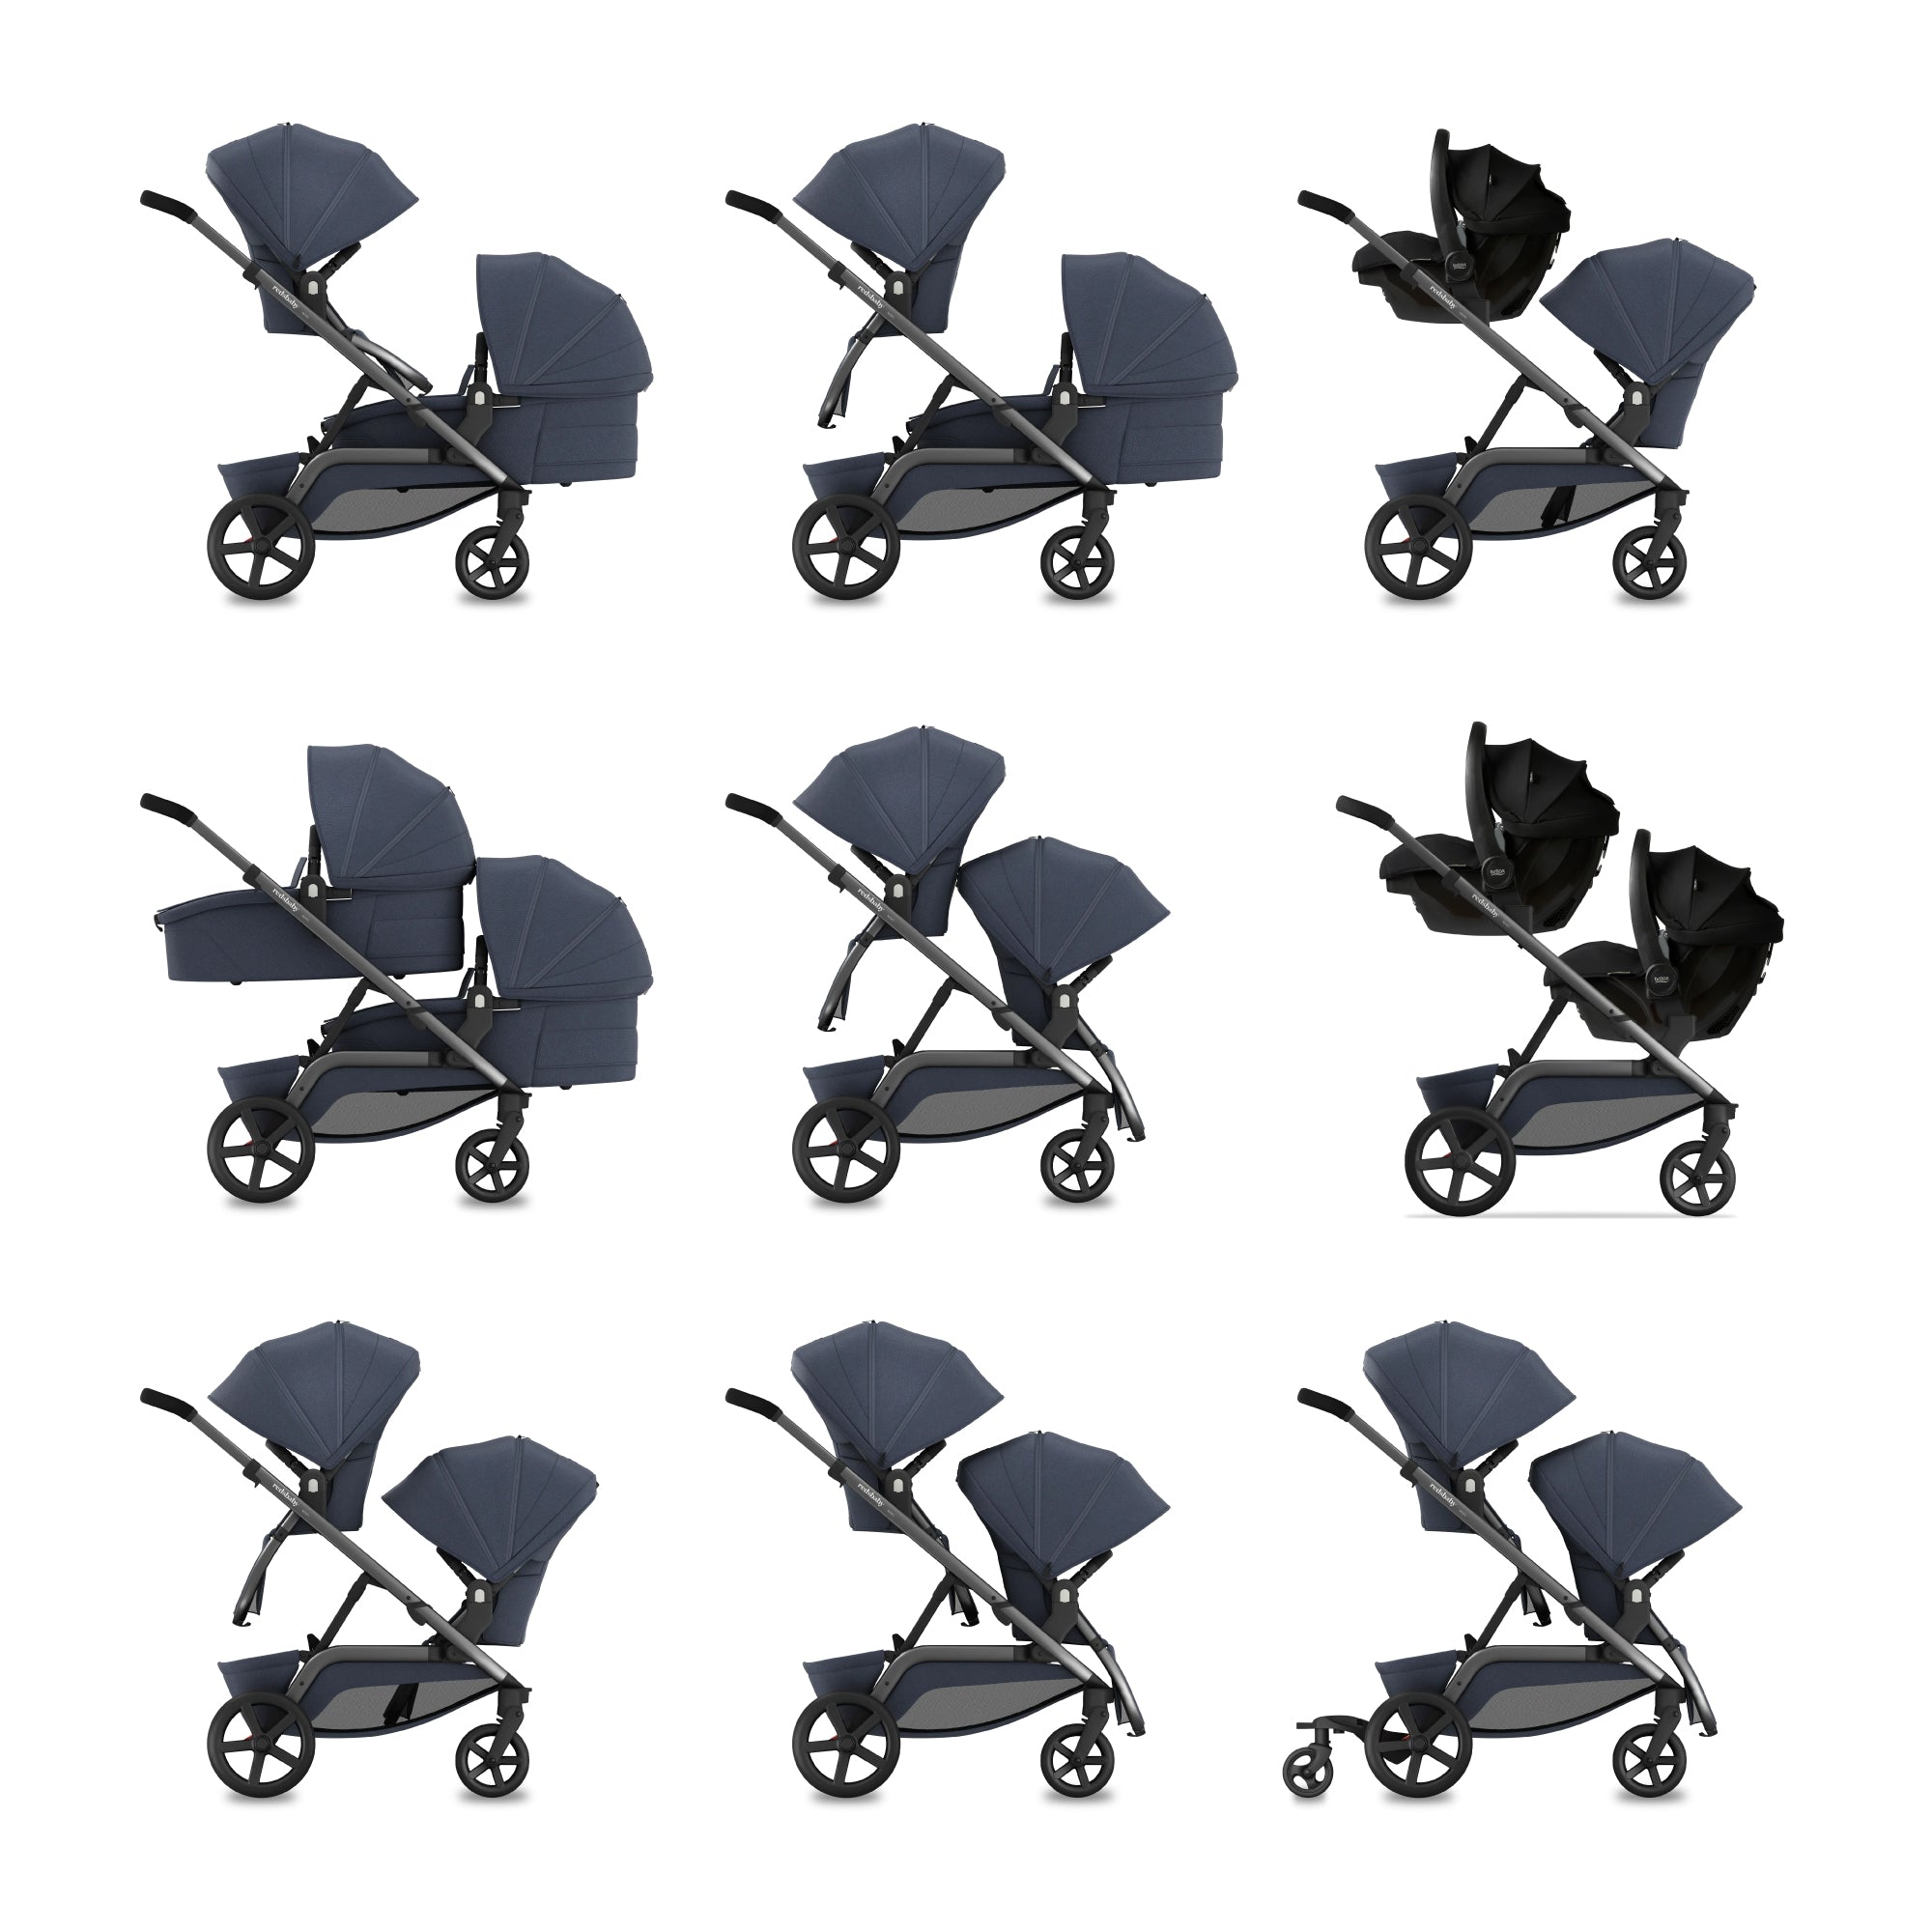 A collage of nine images showcasing various double configurations of the Redsbaby NUVO stroller in a sleek slate blue color. The configurations include options for two bassinets, two seats, and combinations of each, facing both towards the parent and away, highlighting the stroller's adaptability for siblings or twins. Each configuration demonstrates the stroller's functionality and versatility, with a focus on comfort and convenience for both children and parents.